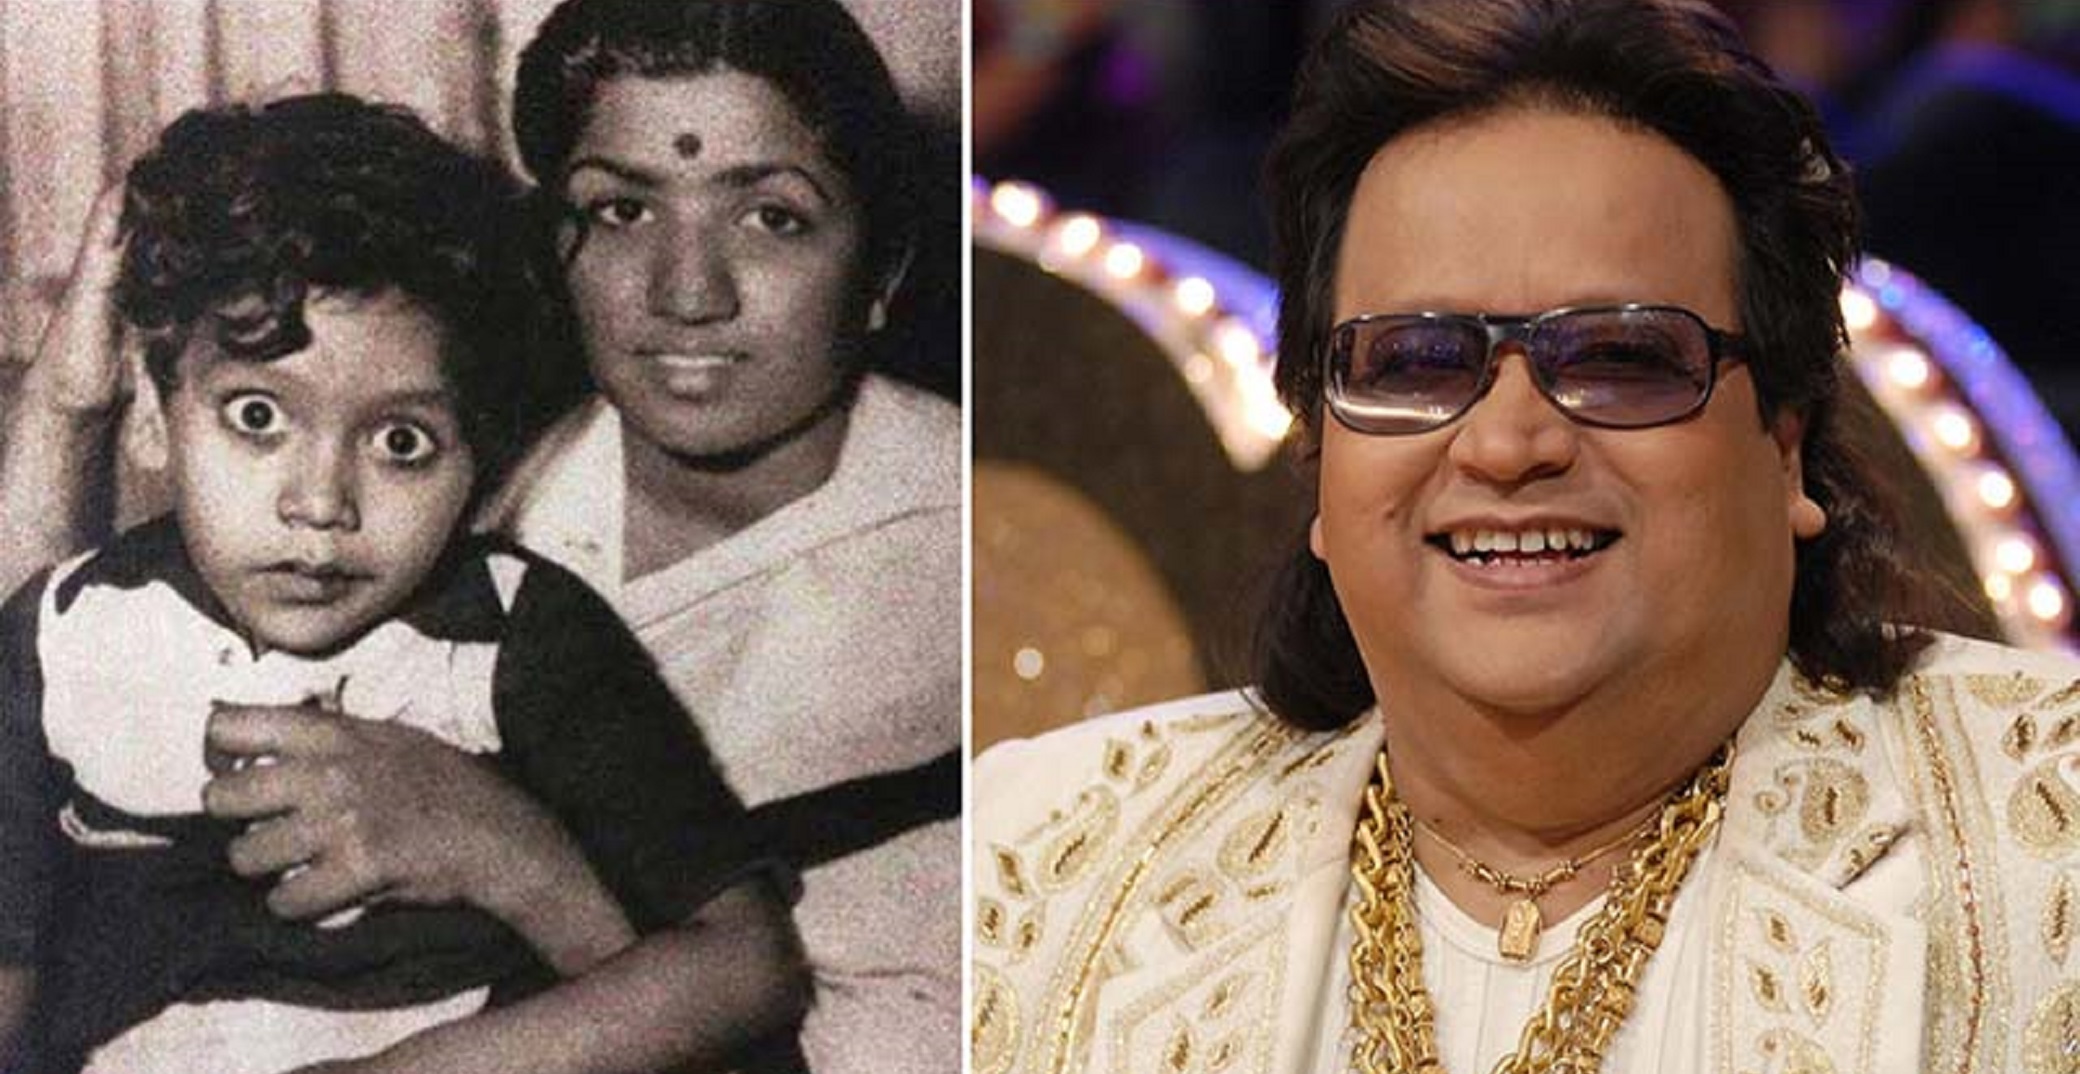 When Bappi Lahiri Said How Lata Mangeshkar Helped In Establishing His Early Career In Music, “Without Her…”